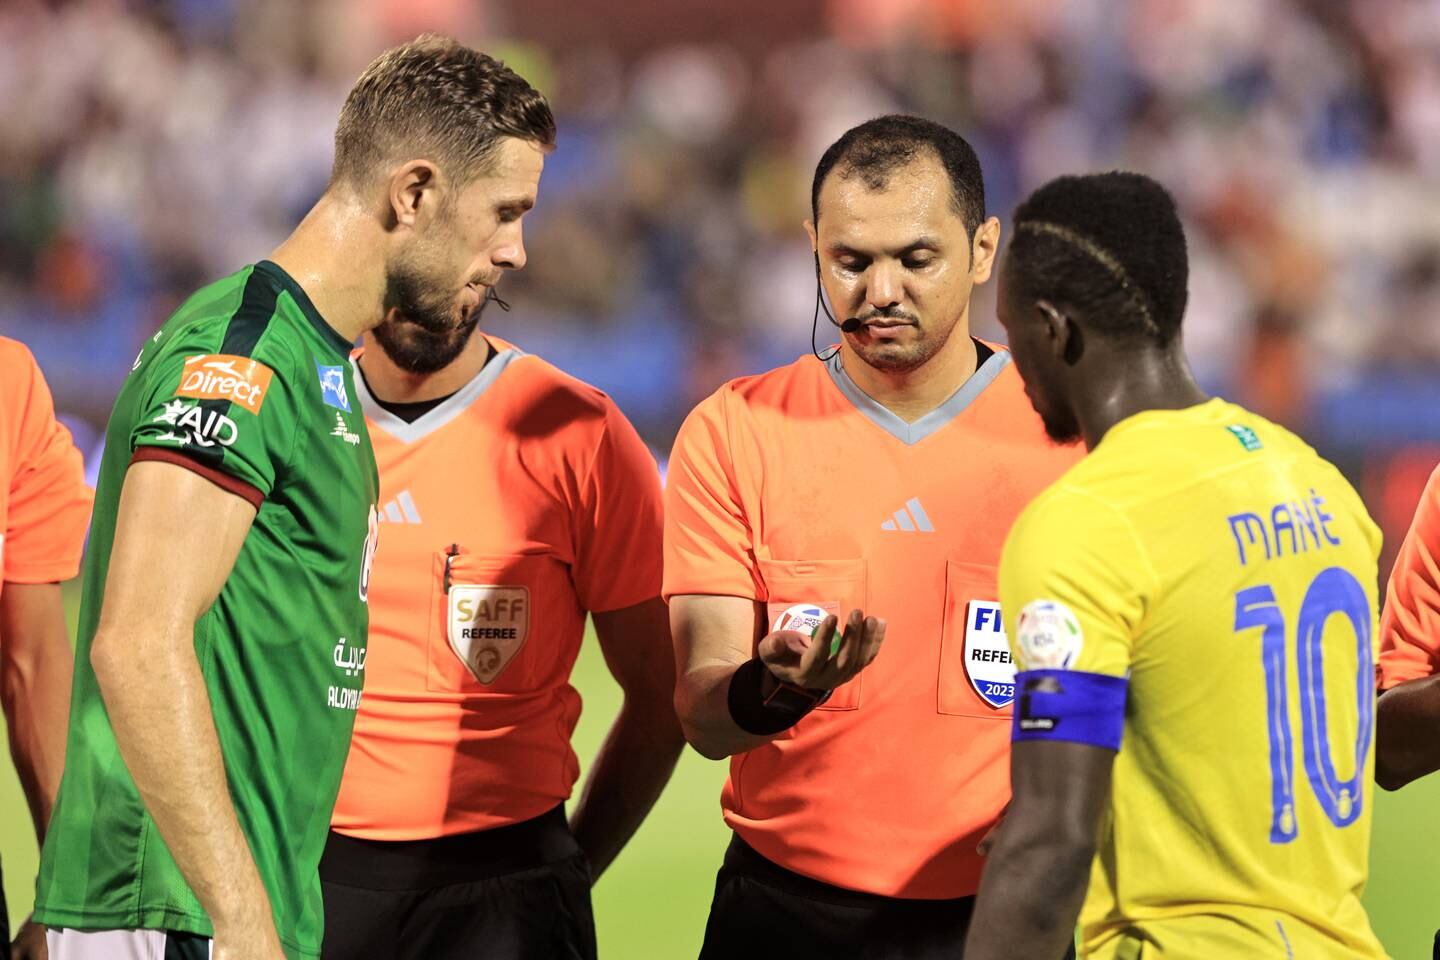 AD DAMMAM, SAUDI ARABIA - AUGUST 14: Jordan Henderson of Al-Ettifaq and Sadio Mane of Al-Nassr take part in the coin toss with match referee Mohammed Al Hoaish prior to the Saudi Pro League match between Al-Ettifaq and Al Nassr at Prince Mohamed bin Fahd Stadium on August 14, 2023 in Ad Dammam, Saudi Arabia. (Photo by Essa Doubisi / Getty Images)